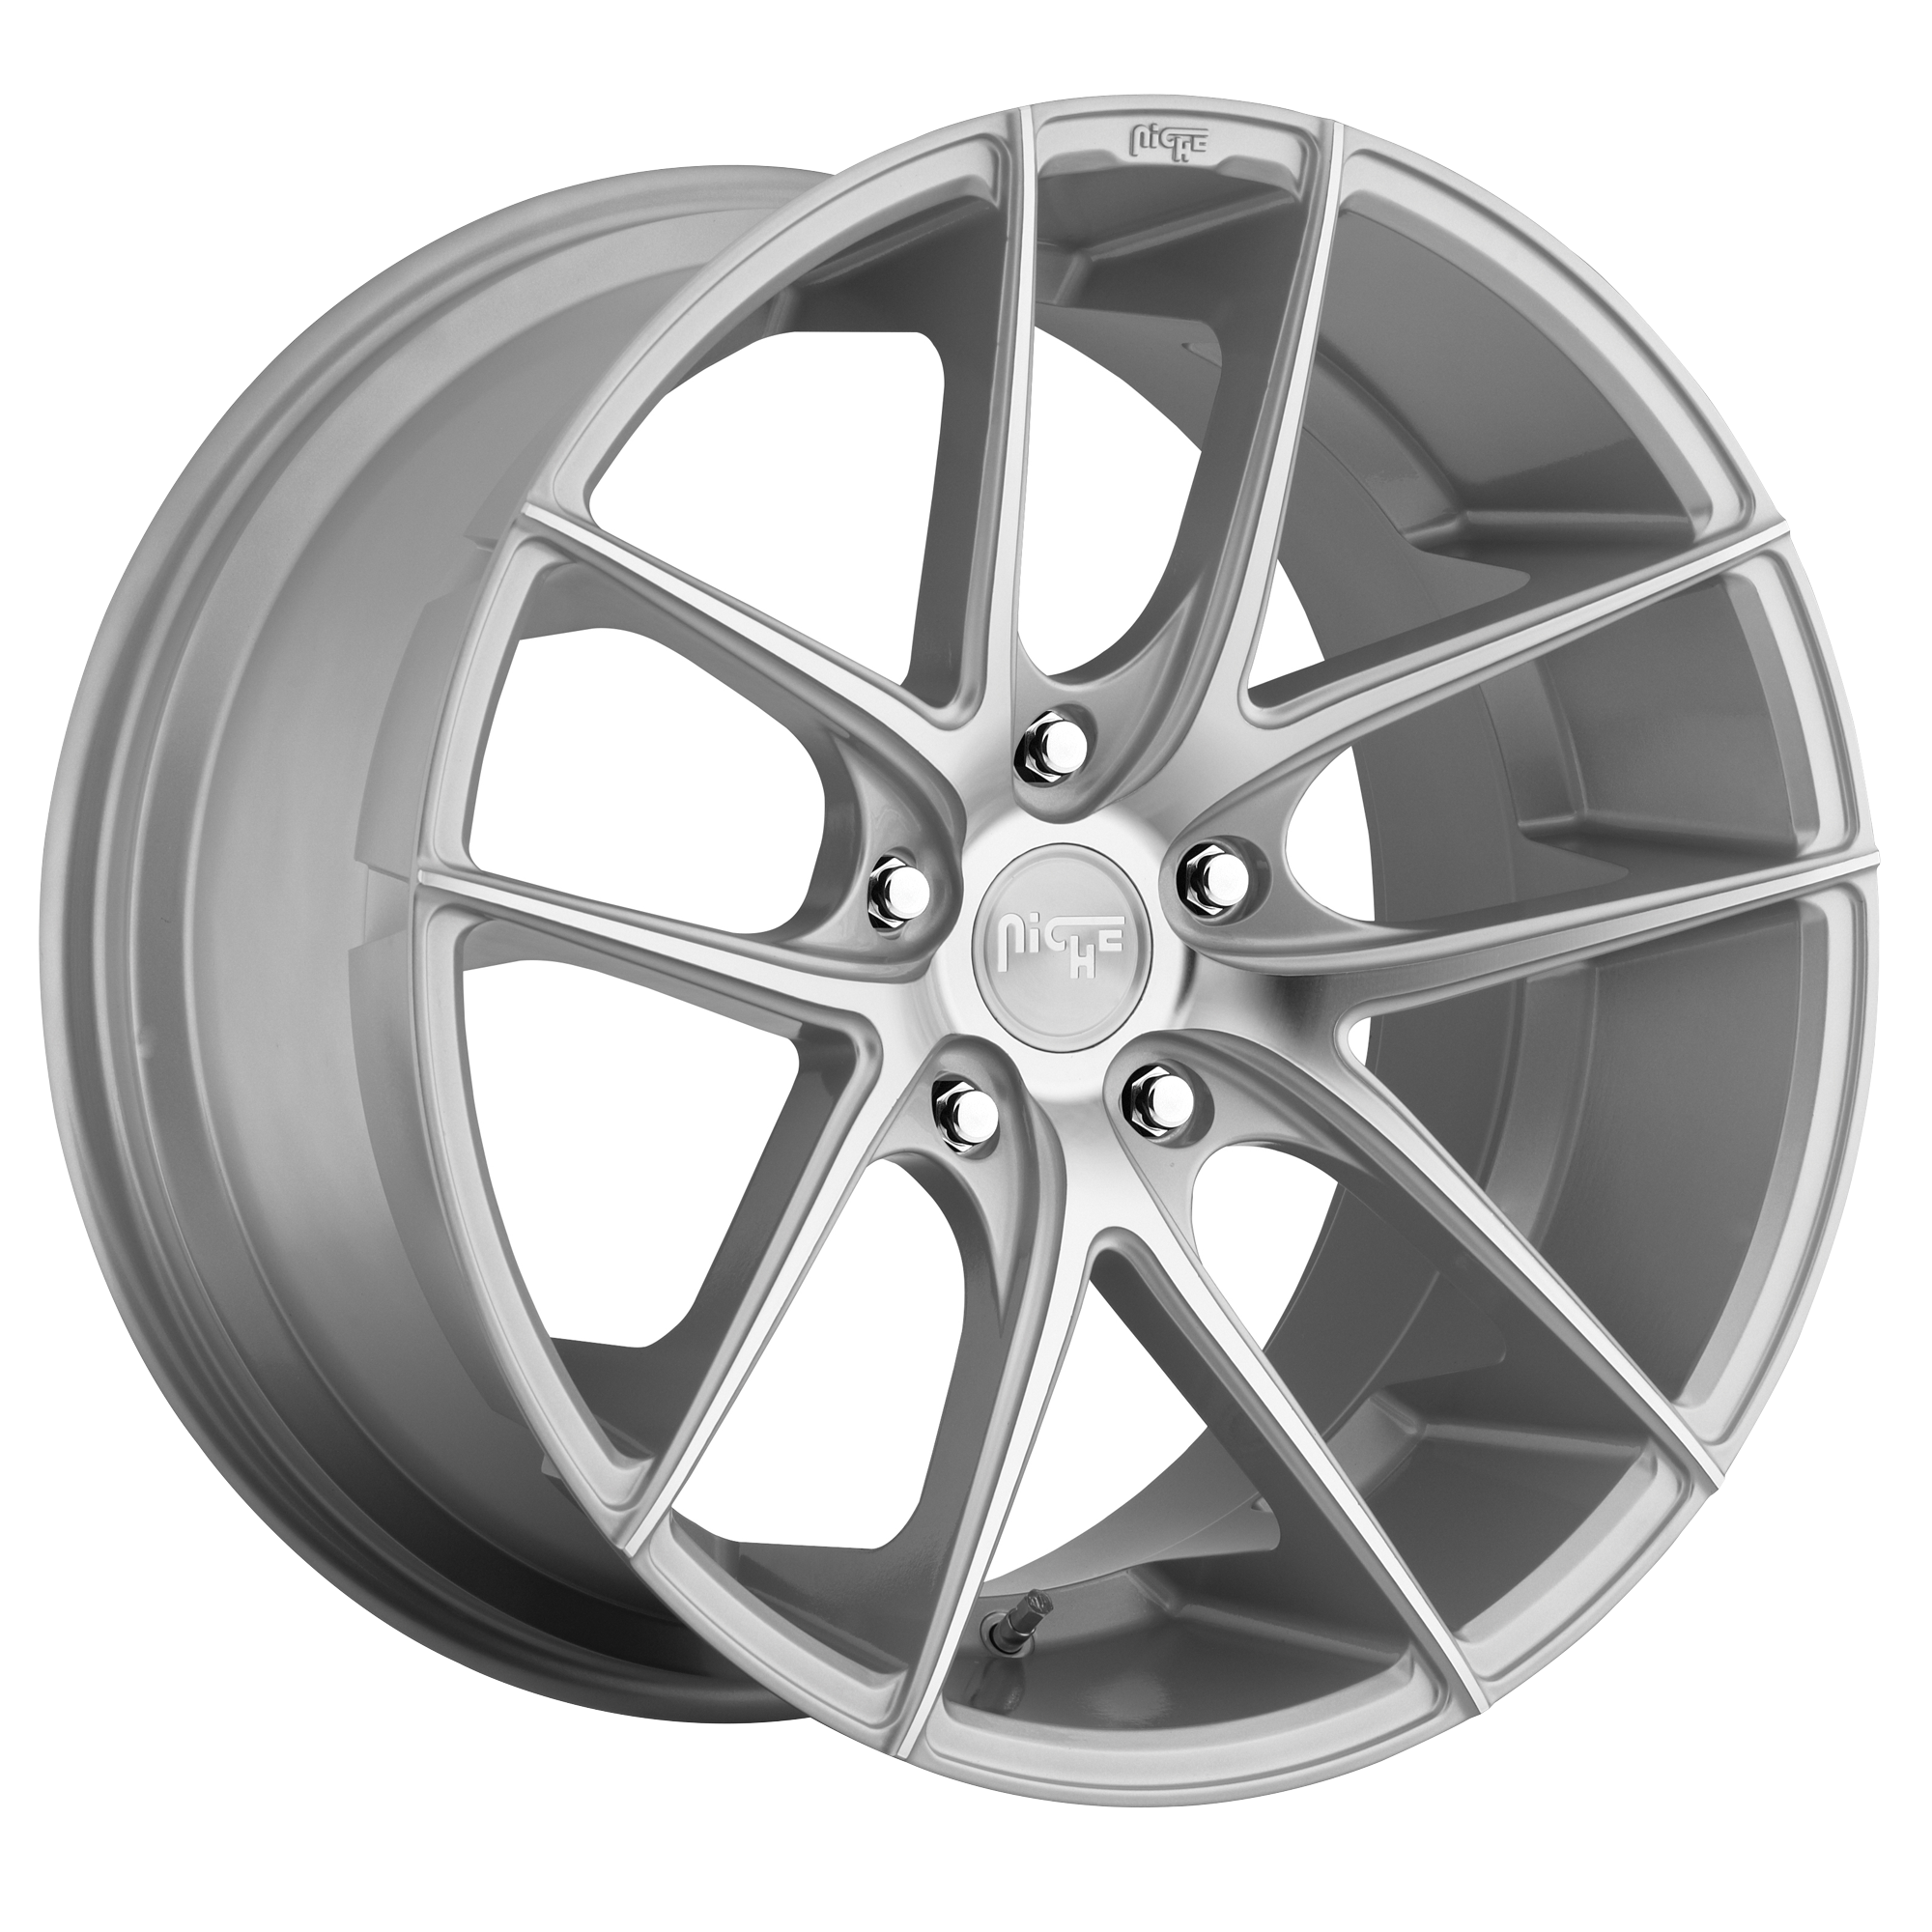 TARGA 20x8.5 5x114.30 GLOSS SILVER MACHINED (35 mm) - Tires and Engine Performance